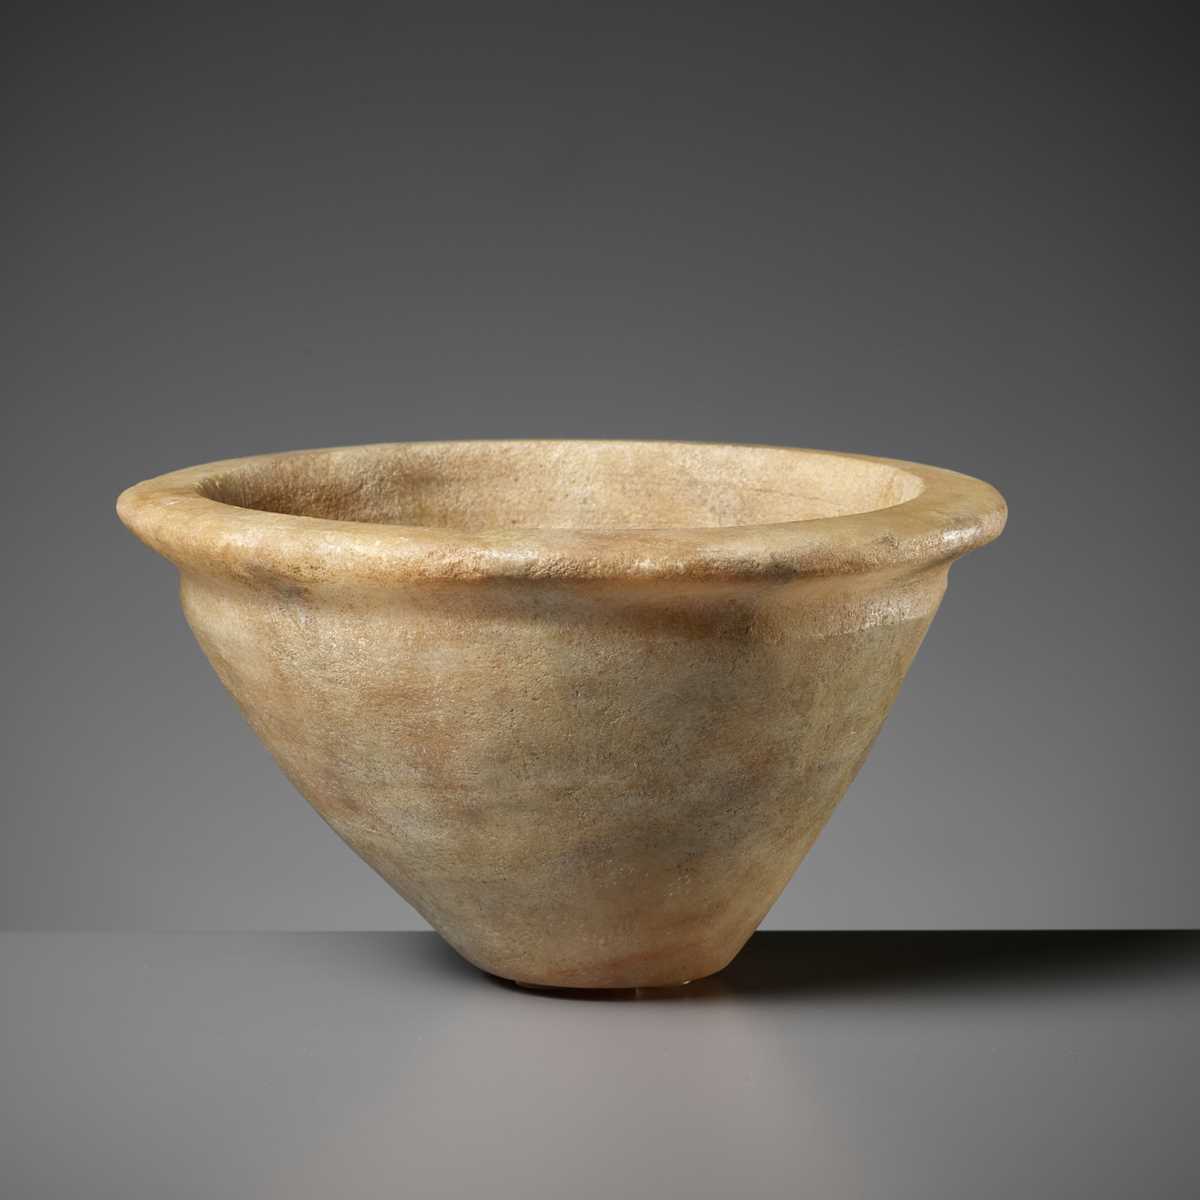 Lot 665 - A BACTRIAN TRAVERTINE BOWL, LATE 3RD TO EARLY 2ND MILLENIUM BC